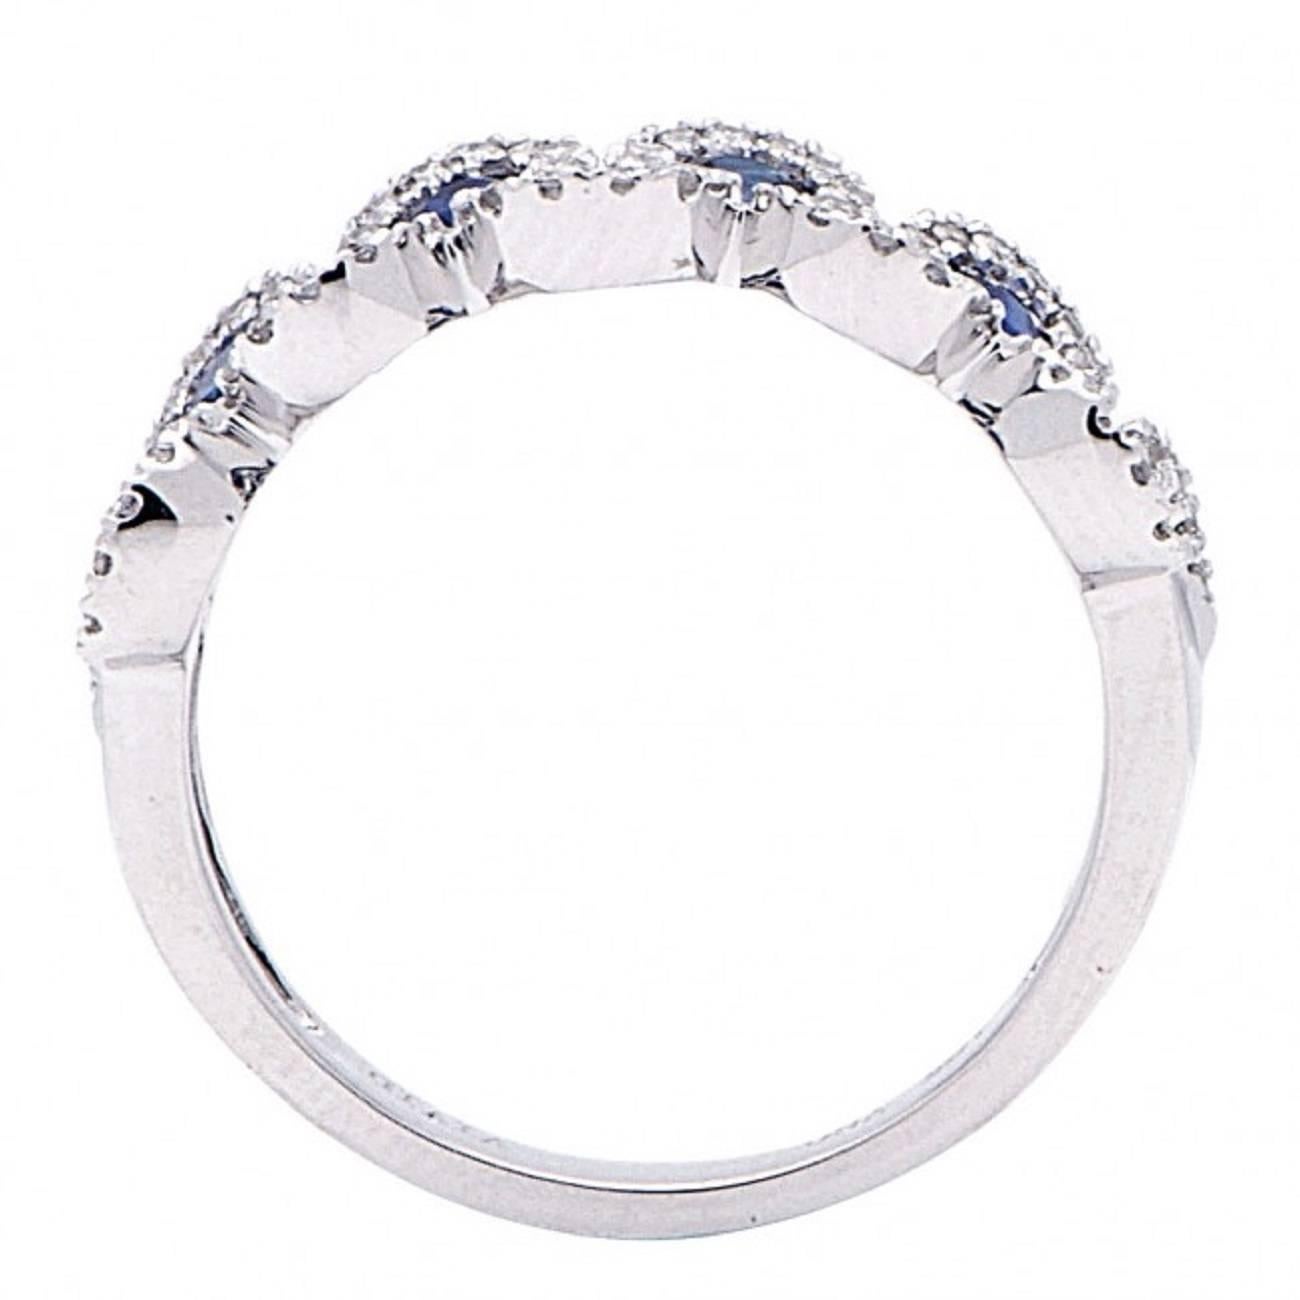 This Stunning Ring Features:
18K White Gold
1.32 Total Cts. Weight.
Diamonds: Round
Diamond Weight: 0.43 Cts.
Diamond Count: 90
Diamond Color: G+
Diamond Clarity: SI1+

Round Sapphire: 9
Sapphire Weight: 0.89 Cts.
Diam. Clarity: